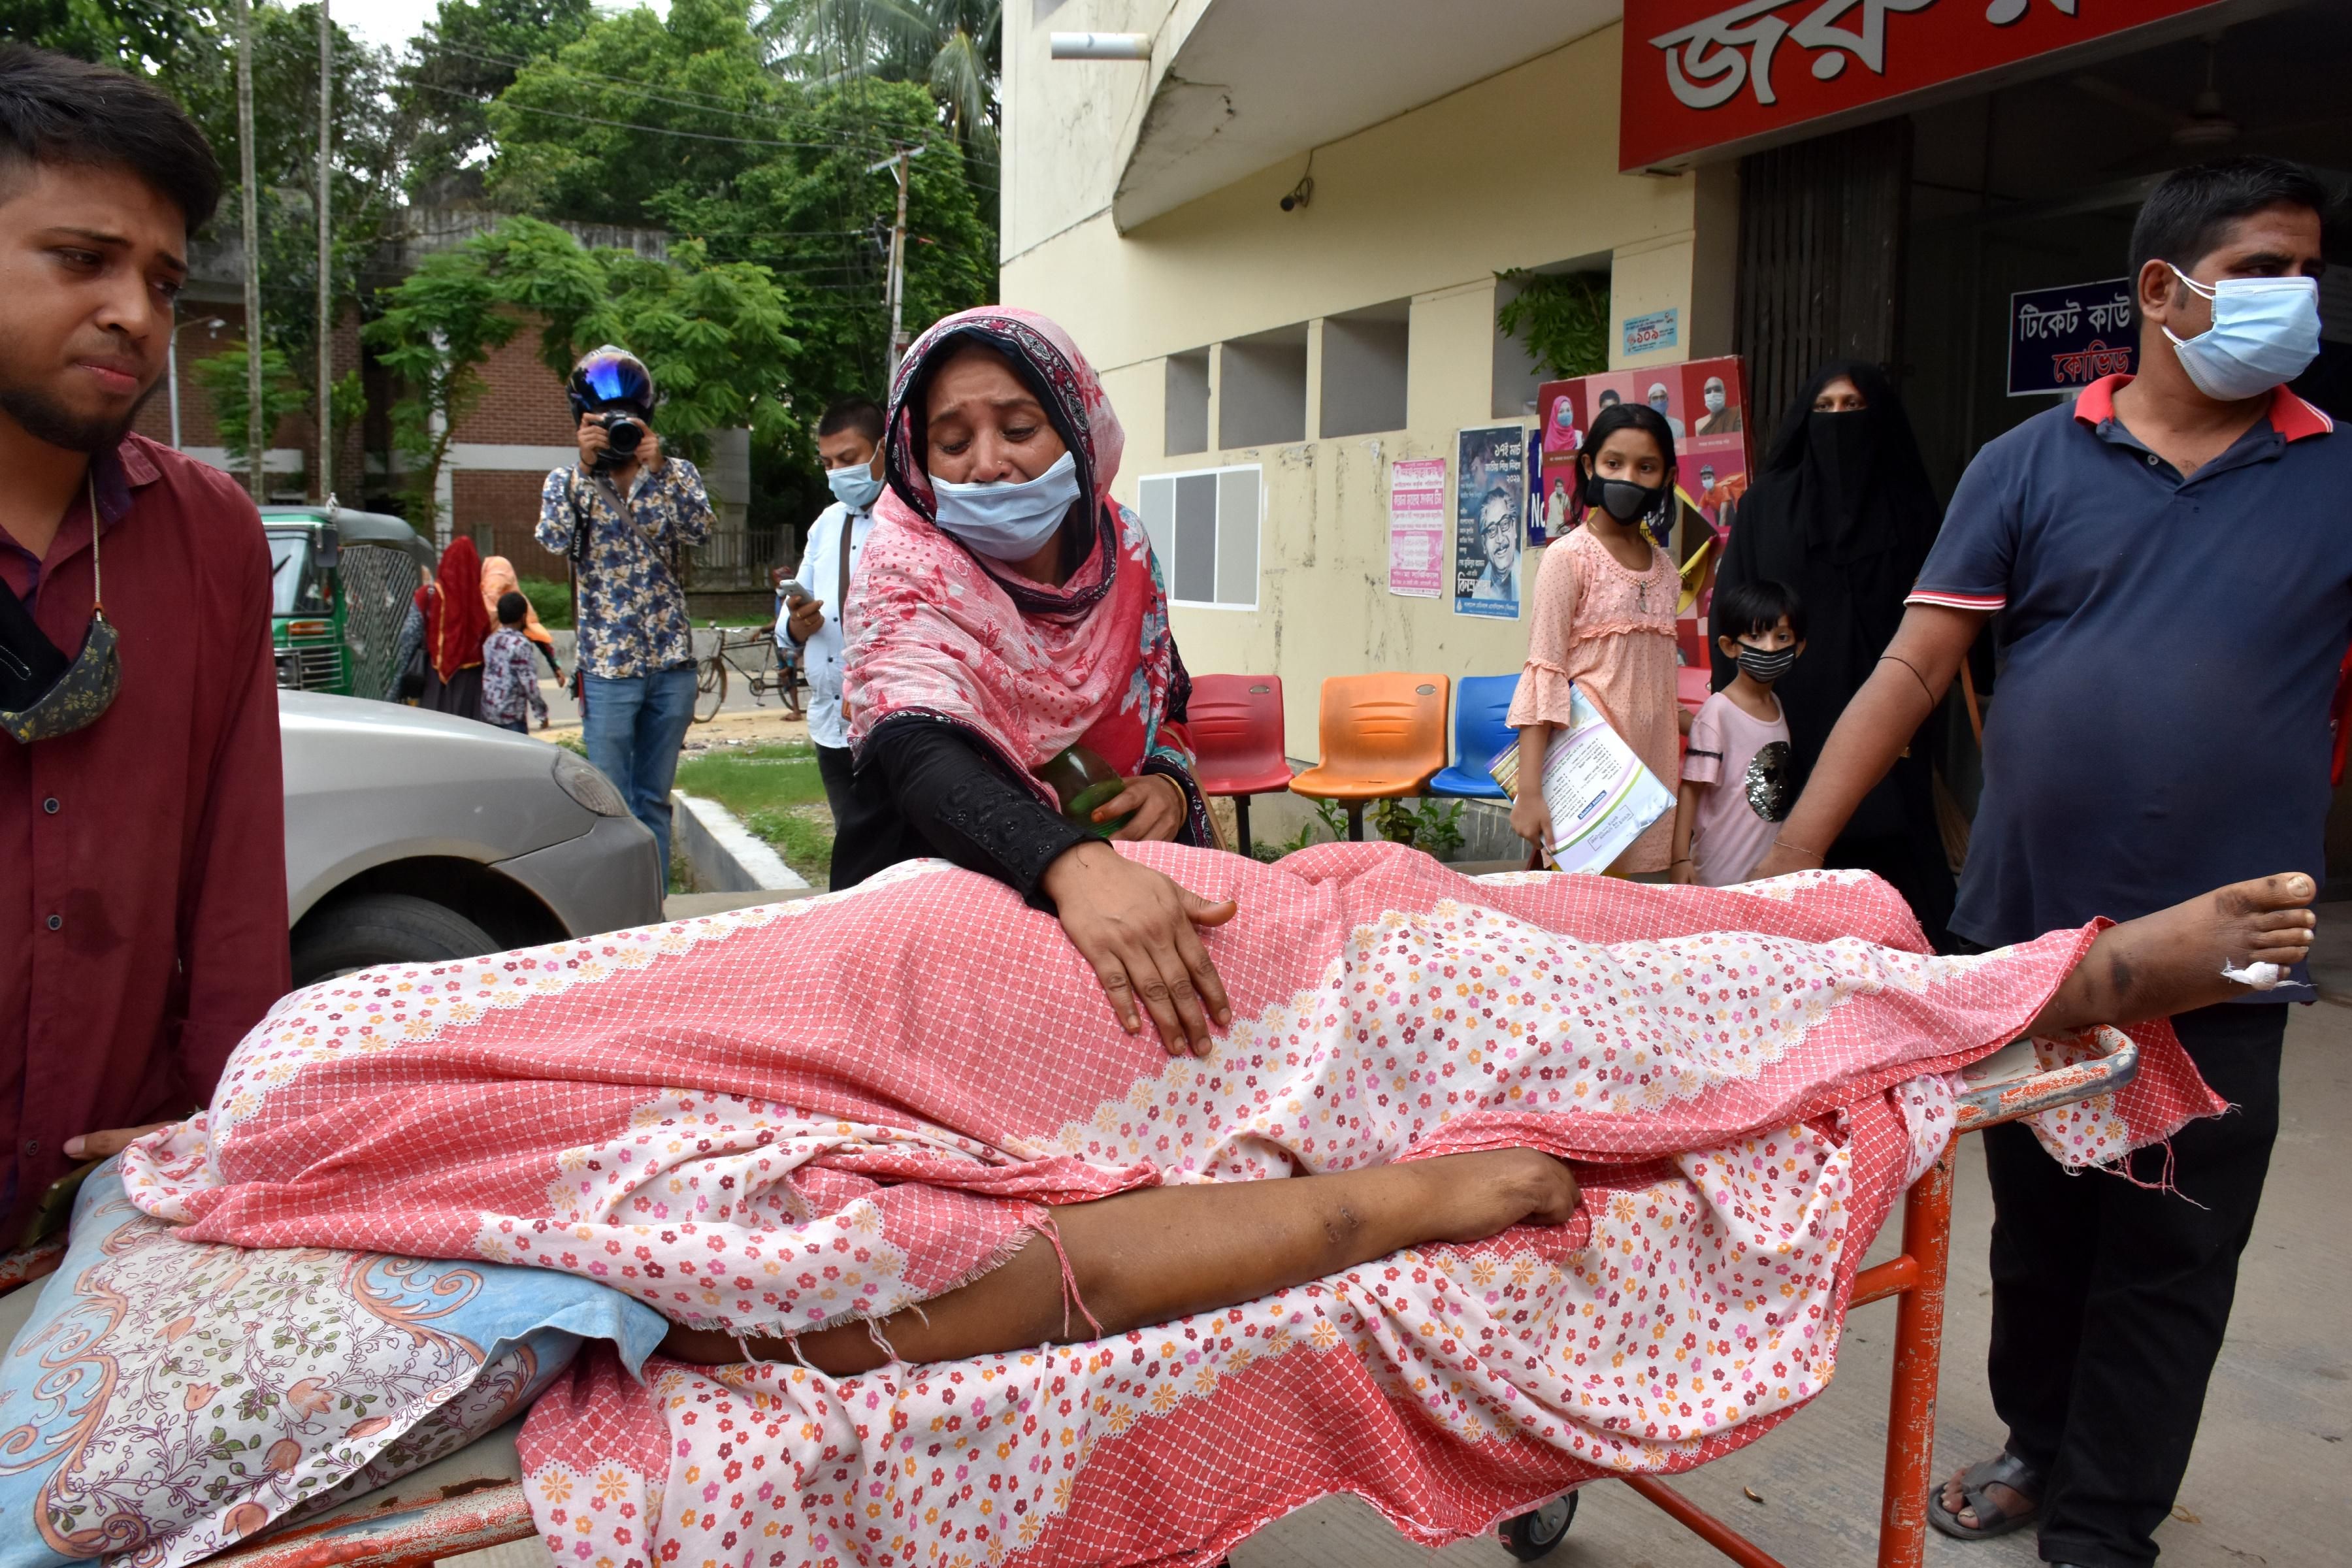 People in Bangladesh mourn a Covid-19 victim